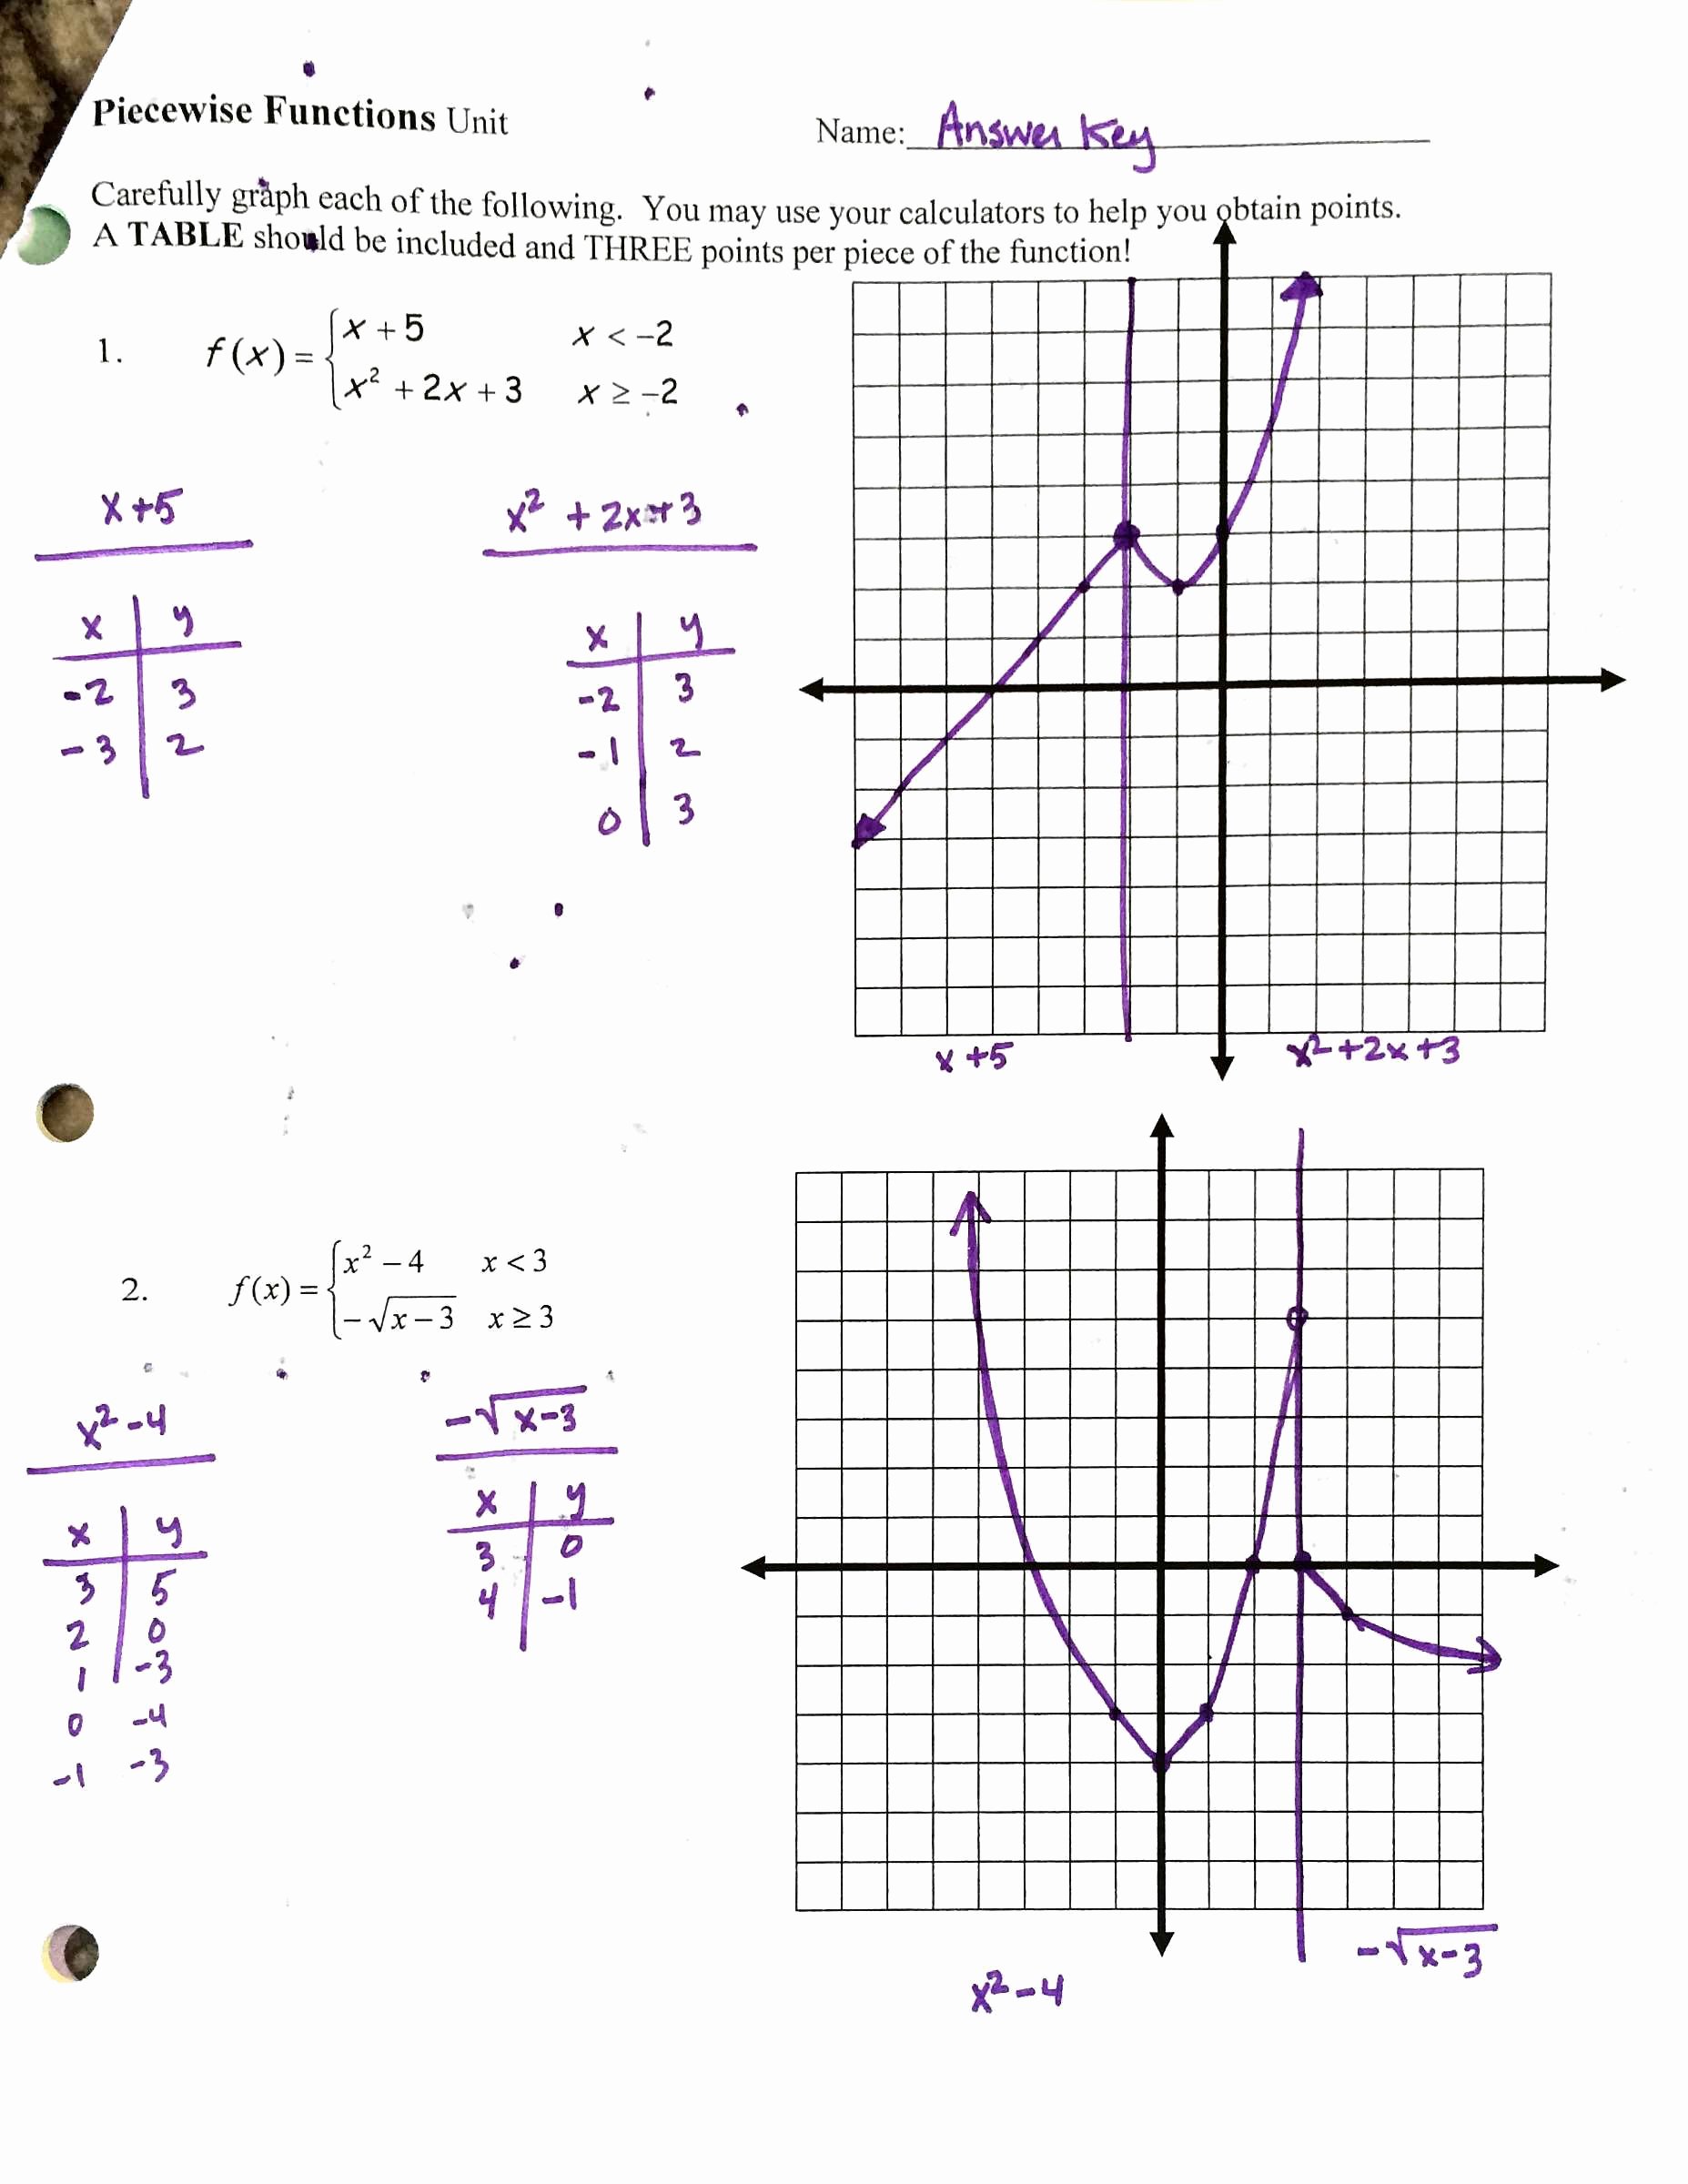 Piecewise Functions Worksheet Answer Key New Worksheet 1 8 Homework Piecewise Functions Answer Key